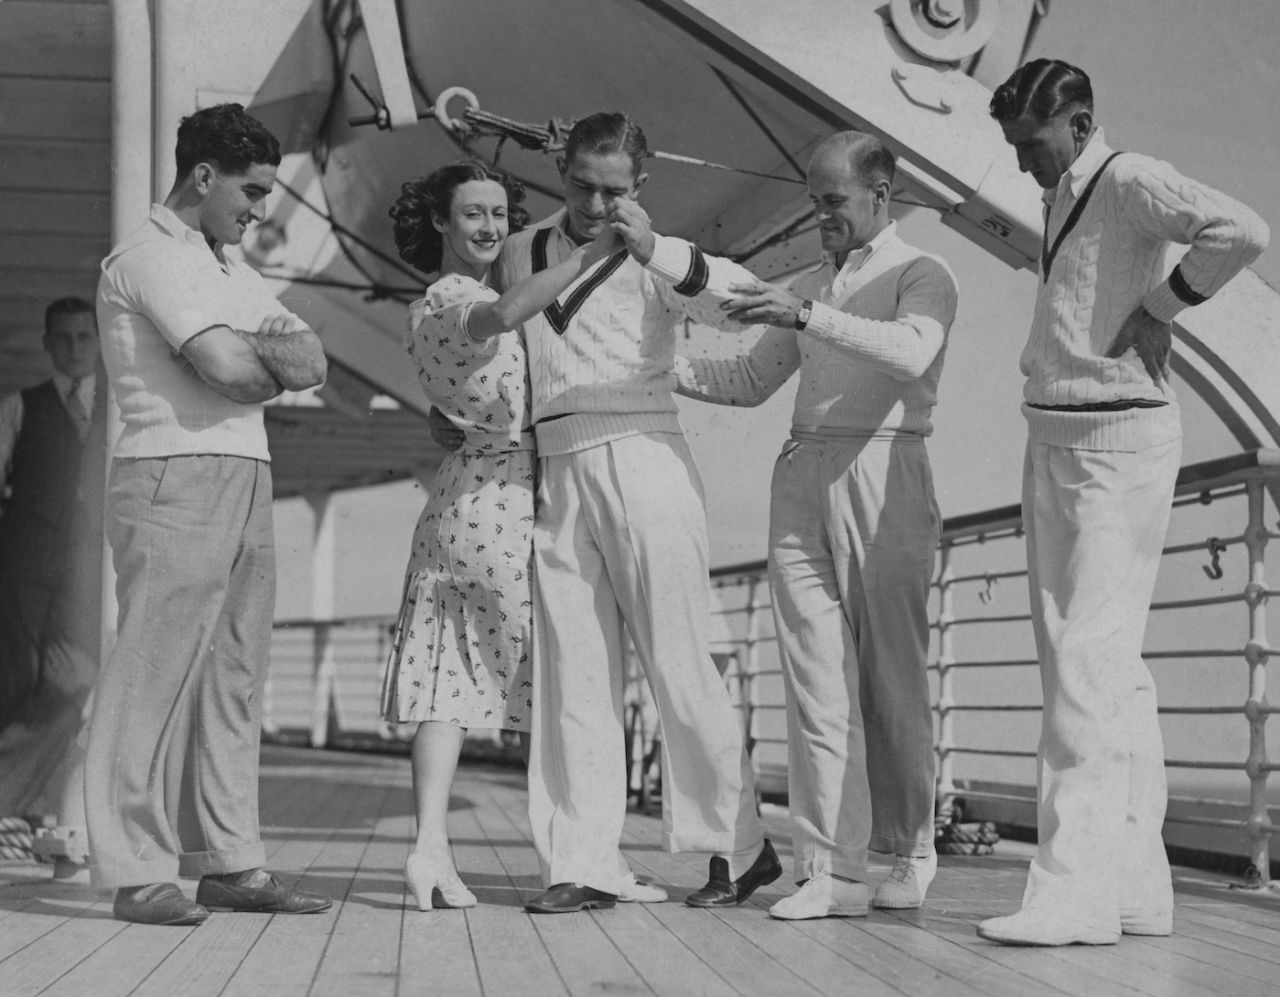 Sid Barnes learns the quickstep onboard the Orontes bound for England, April 16, 1938